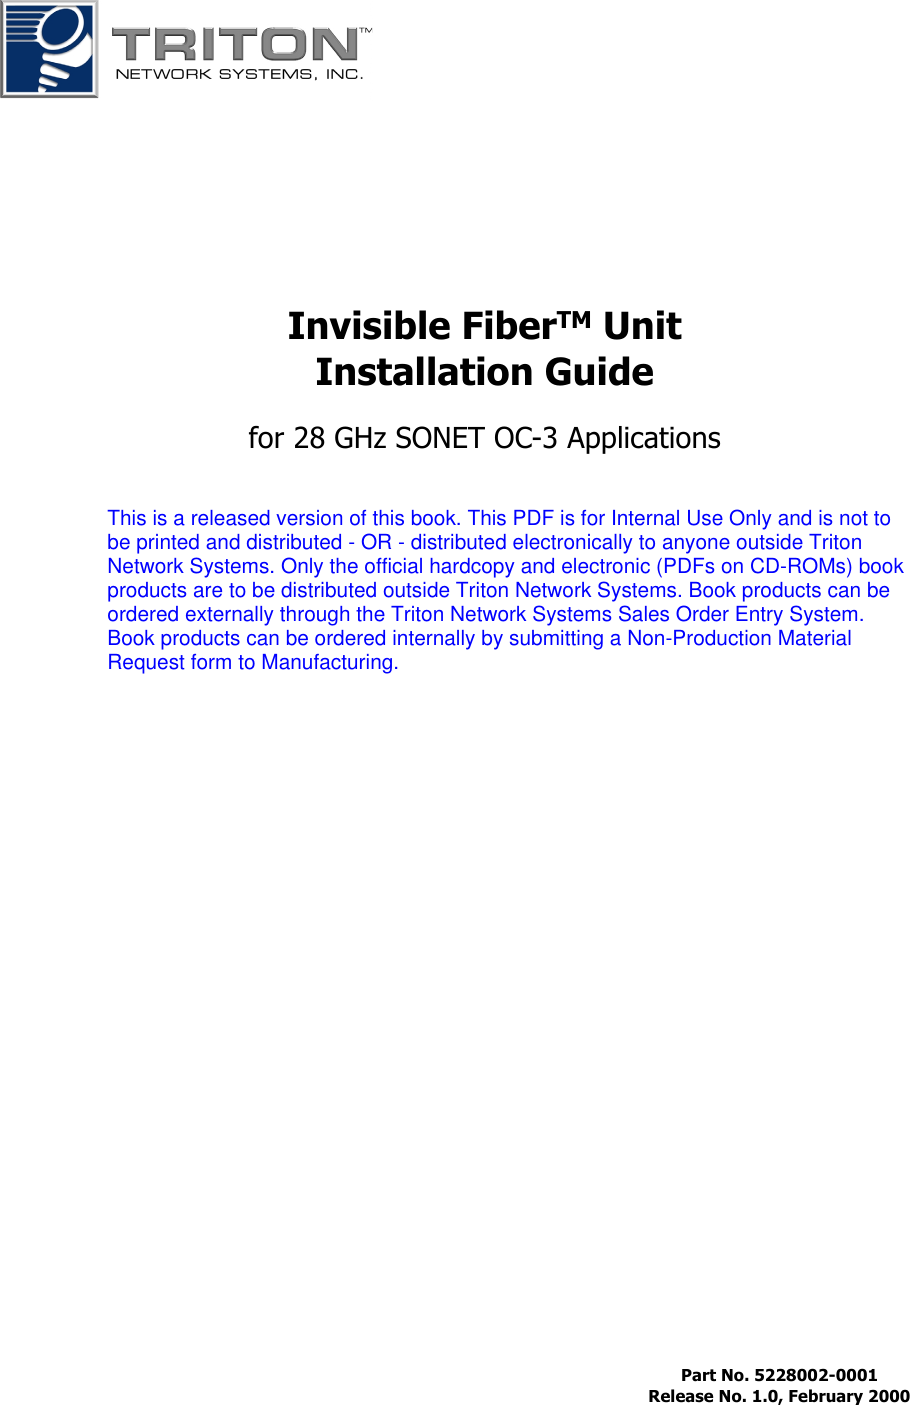 Invisible FiberTM UnitInstallation Guidefor 28 GHz SONET OC-3 Applications Part No. 5228002-0001 Release No. 1.0, February 2000This is a released version of this book. This PDF is for Internal Use Only and is not tobe printed and distributed - OR - distributed electronically to anyone outside TritonNetwork Systems. Only the official hardcopy and electronic (PDFs on CD-ROMs) bookproducts are to be distributed outside Triton Network Systems. Book products can beordered externally through the Triton Network Systems Sales Order Entry System.Book products can be ordered internally by submitting a Non-Production MaterialRequest form to Manufacturing.